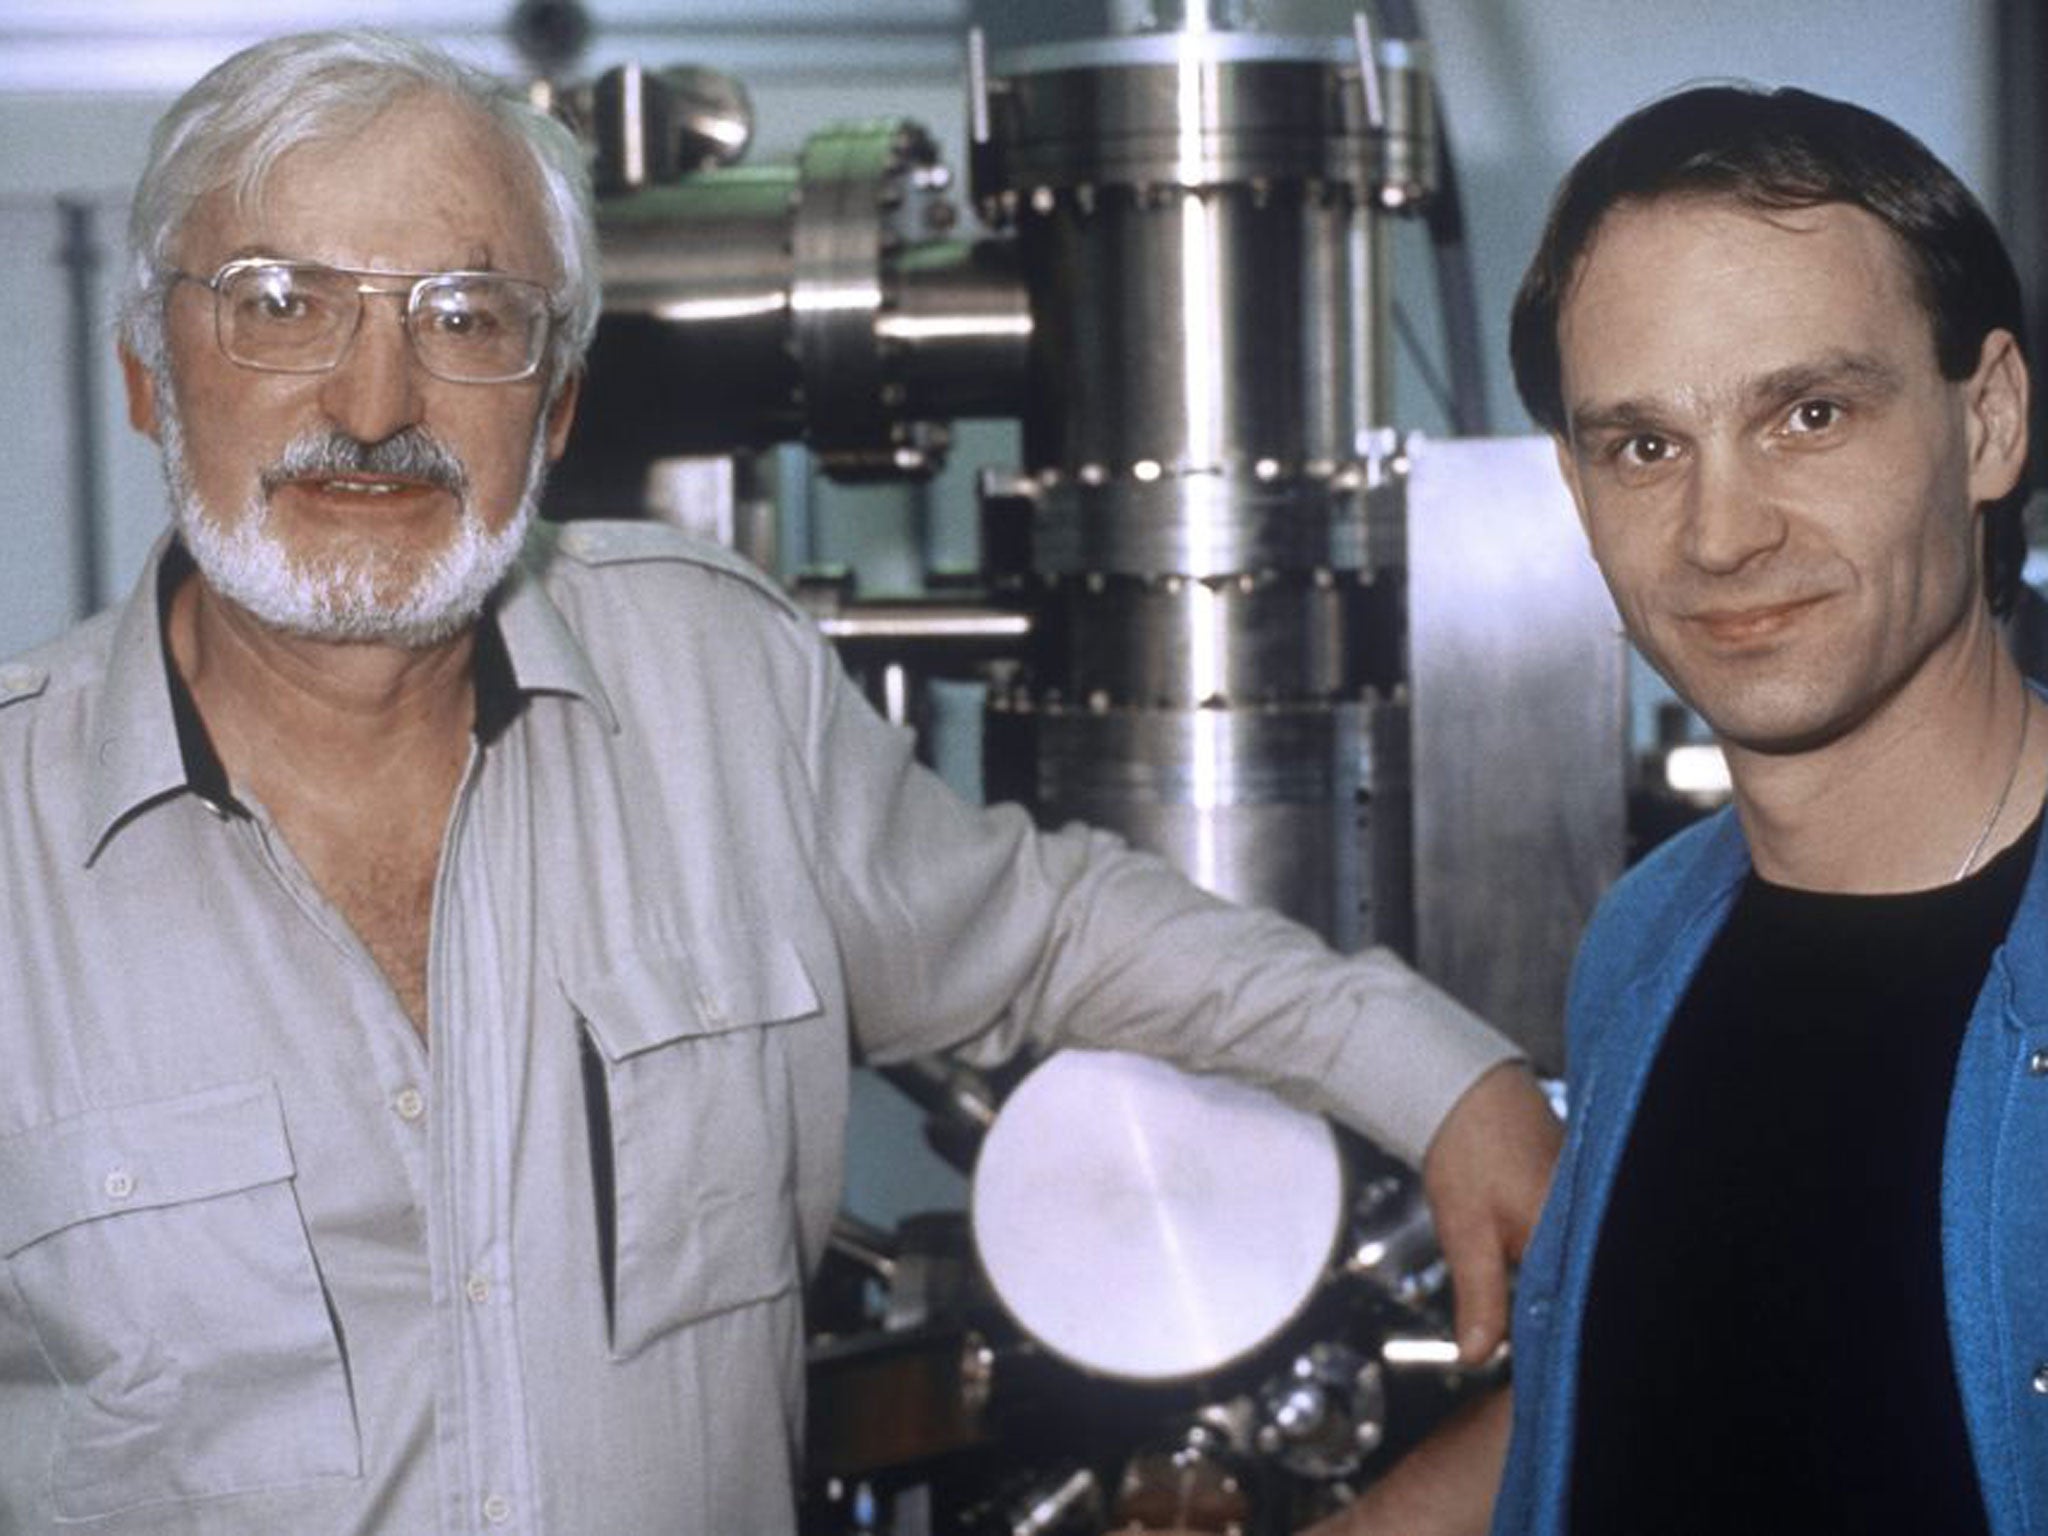 Rohrer (left) in 1986 with his colleague, and joint-recipient of the Nobel Prize, Gerd Binnig